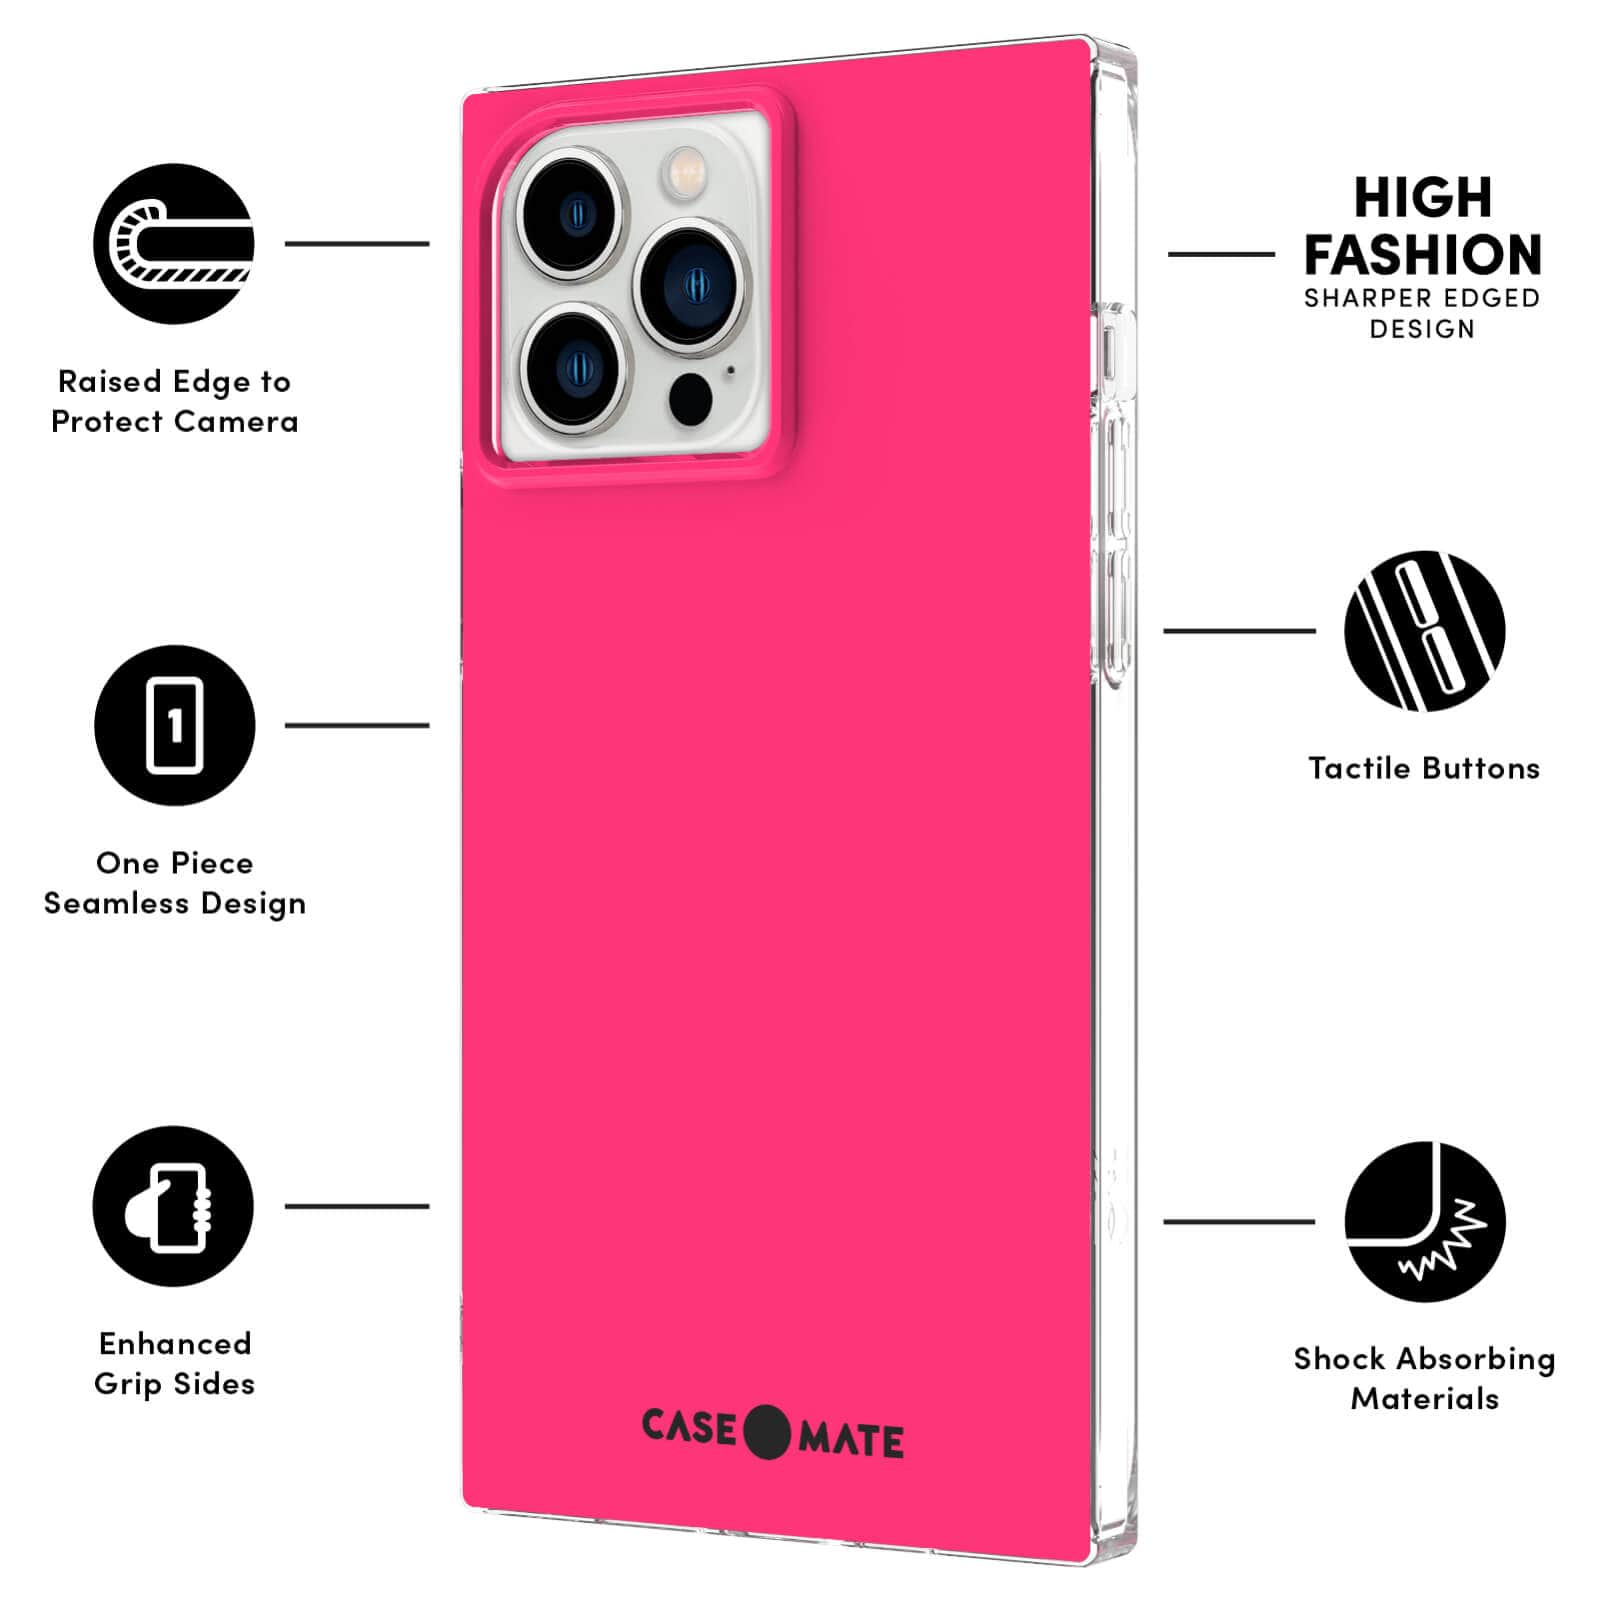 FEATURES: RAISED EDGE TO PROTECT CAMERA, ONE PIECE SEAMLESS DESIGN, ENHANCED GRIP SIDES, HIGH FASHION SHARPR EDGED DESIGN, TACTILE BUTTONS, SHOCK ABSORBING MATERIALS. COLOR::HOT PINK